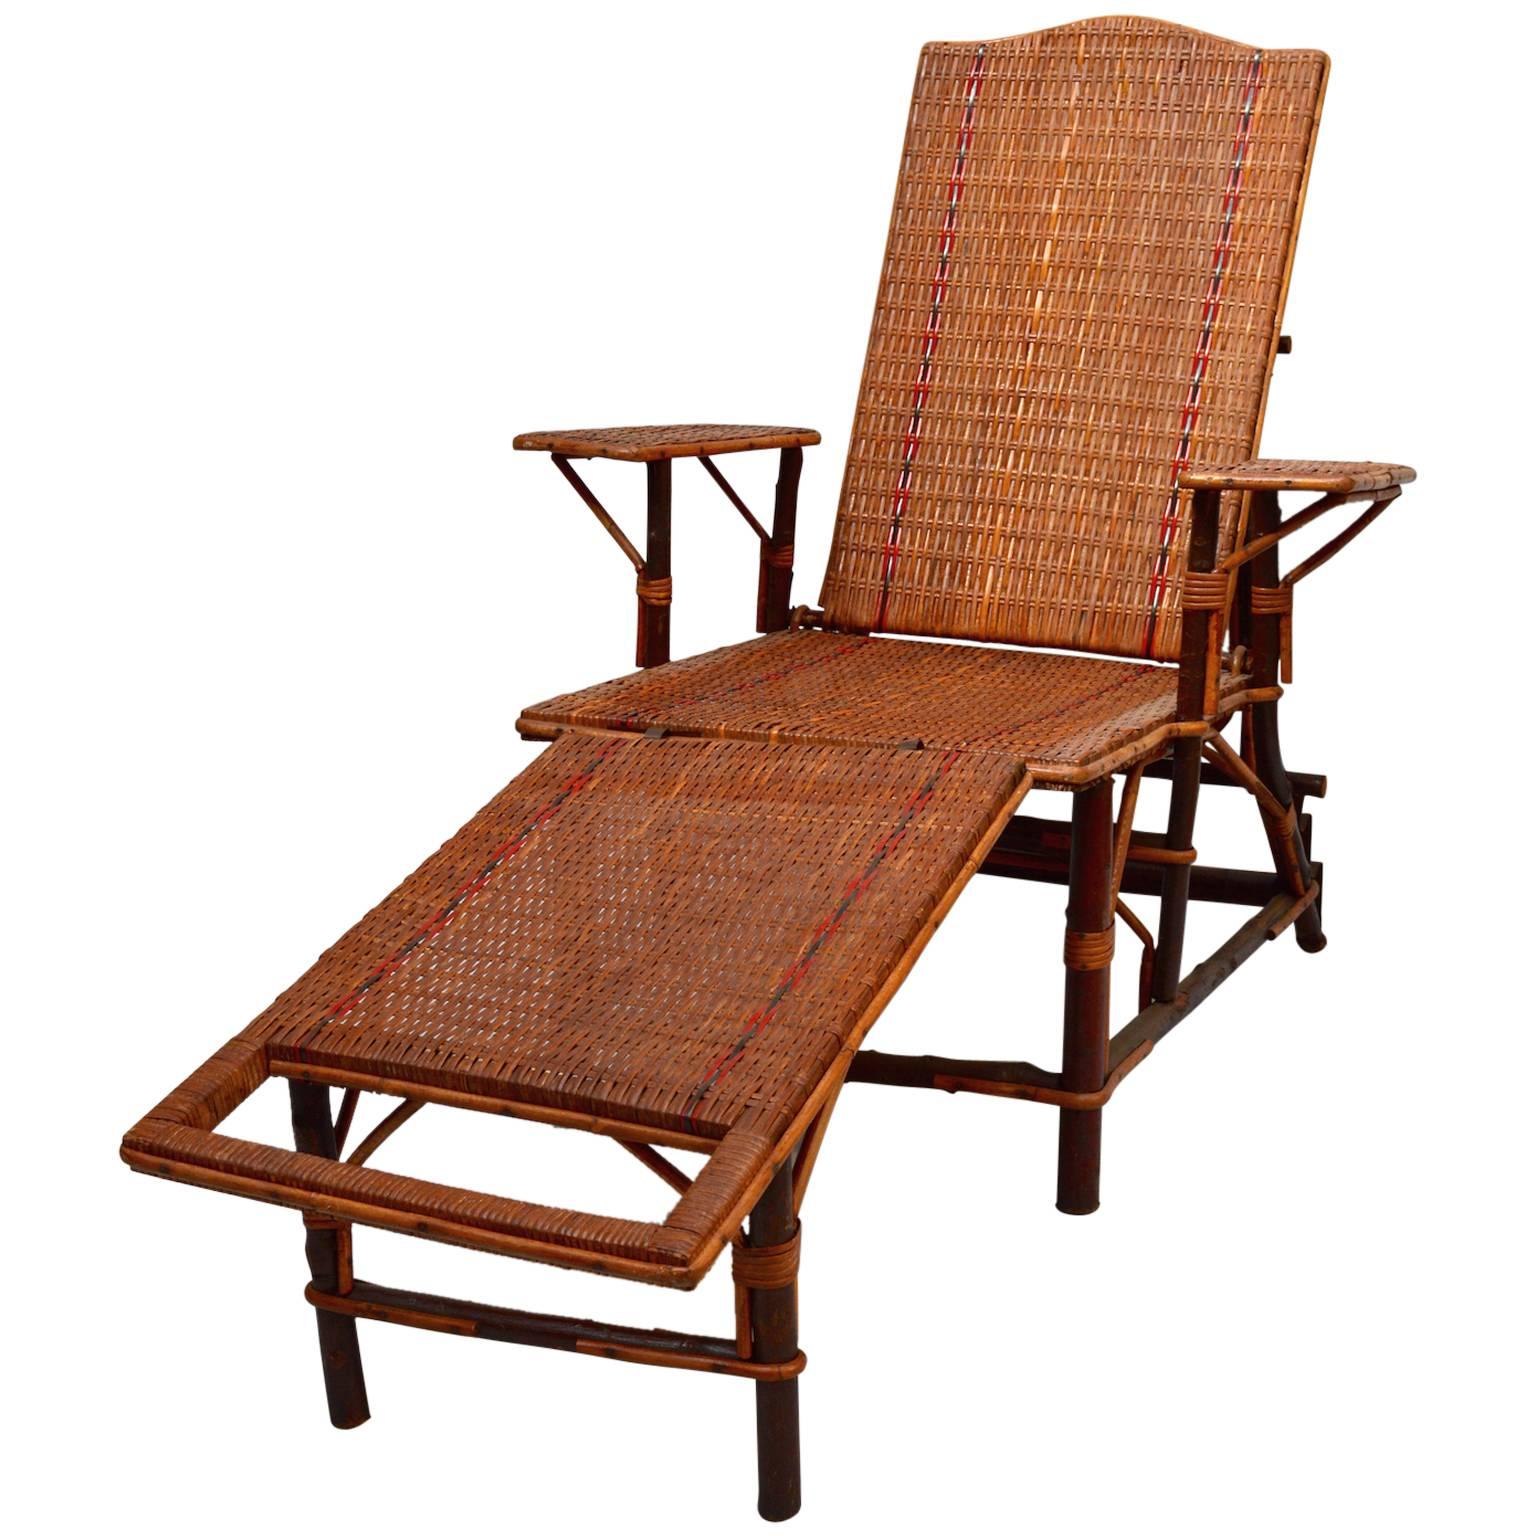 Vintage French Woven Rattan and Wicker Lounge Chair